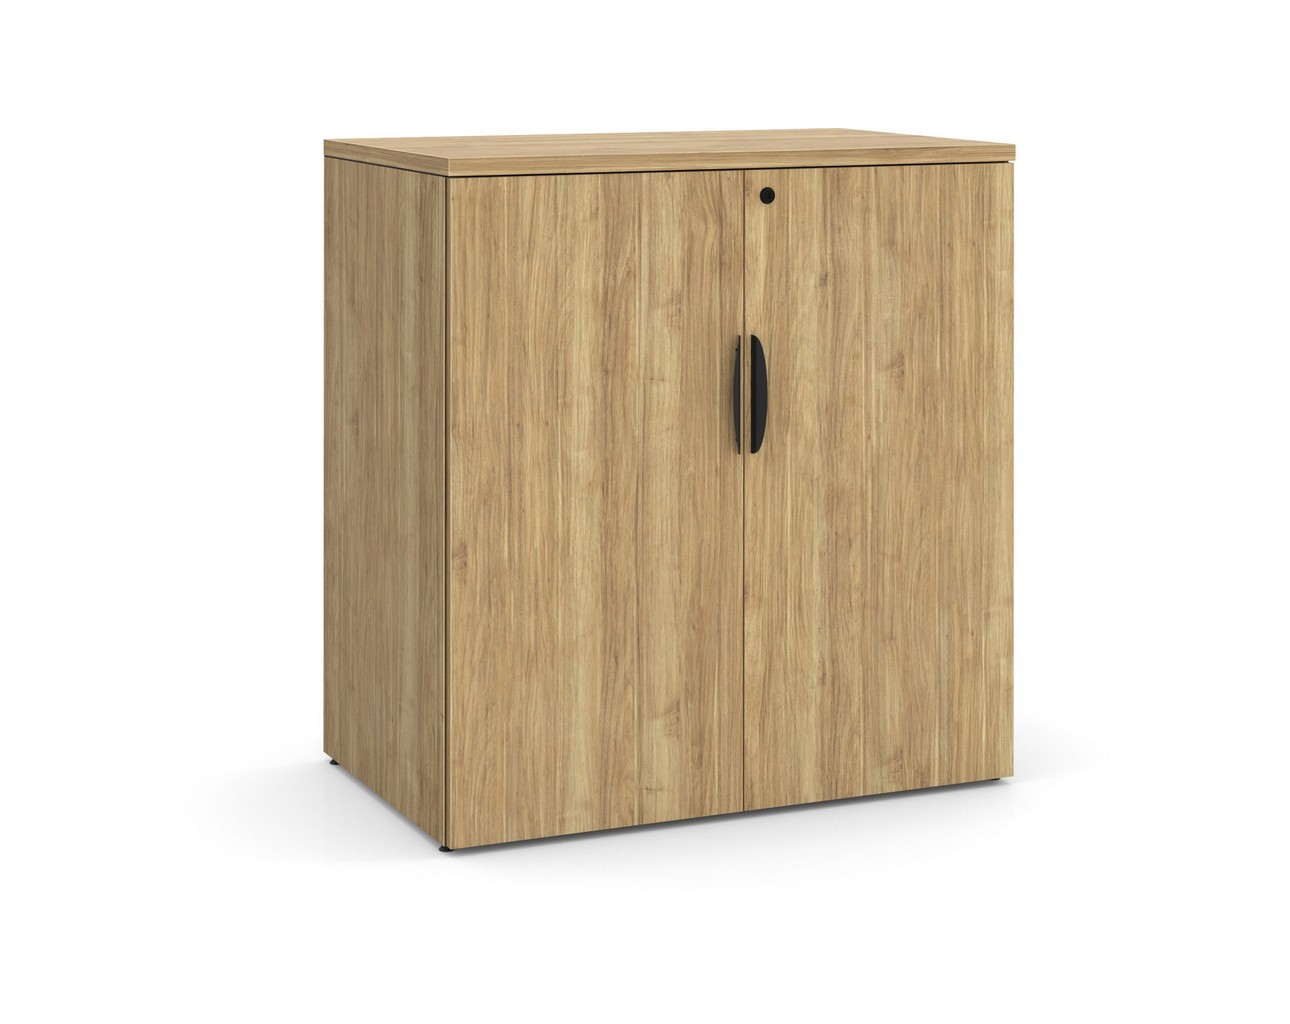 Locking Double Door Storage Cabinet 38 Inch with Aspen Finish